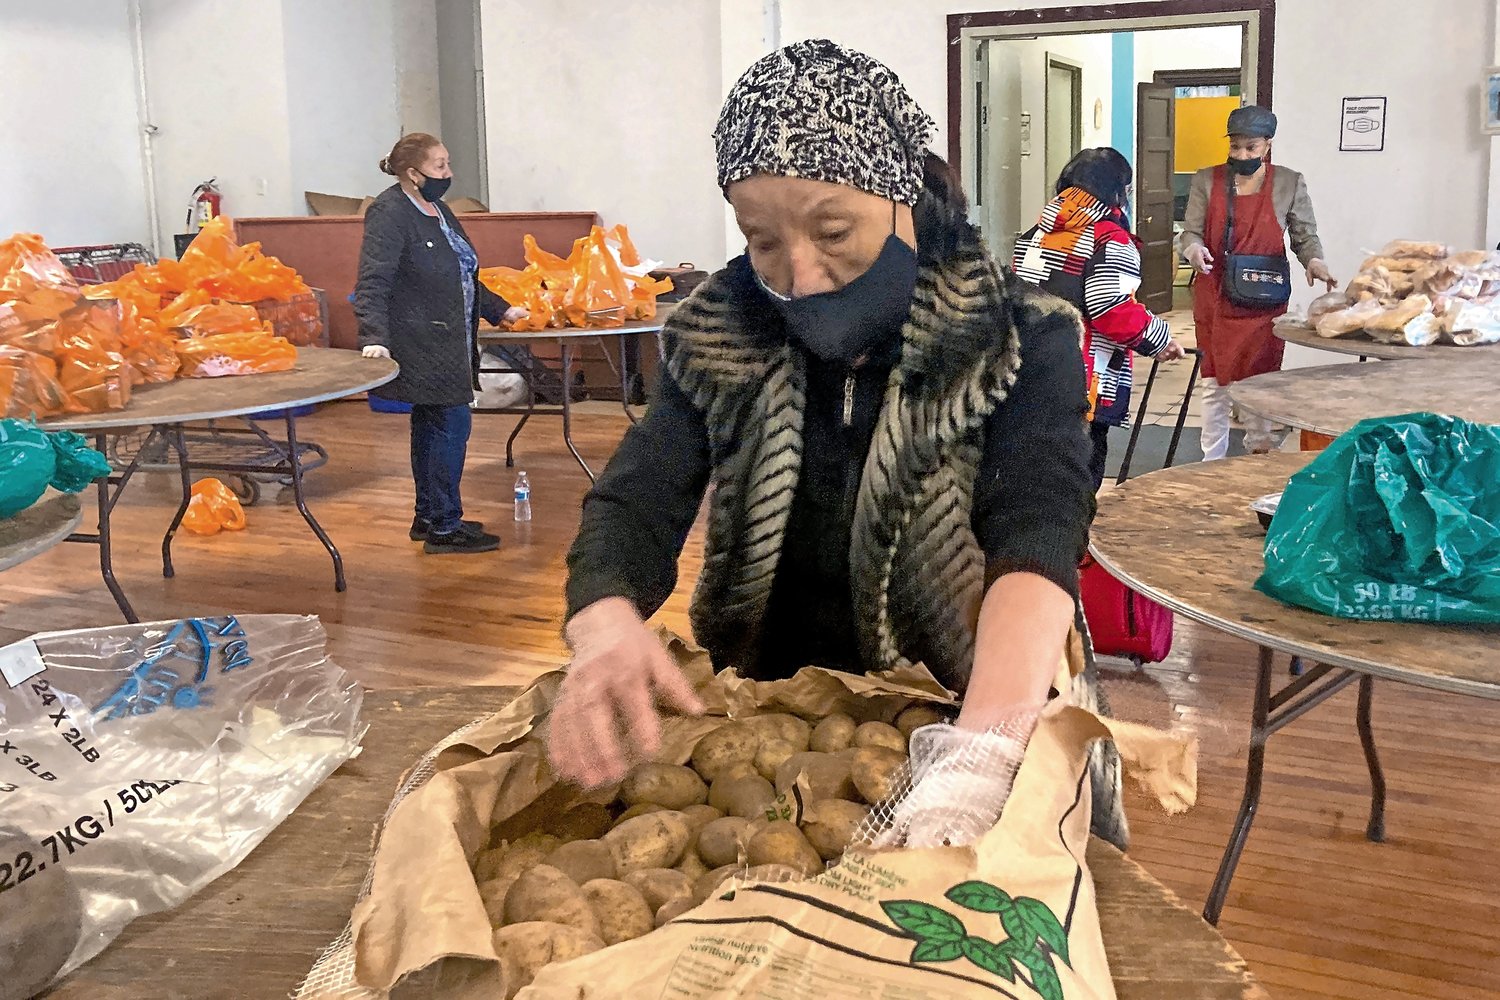 Organizers at the Church of the Mediator work all day to help provide hundreds of Kingsbridge residents the food they will need for the week.